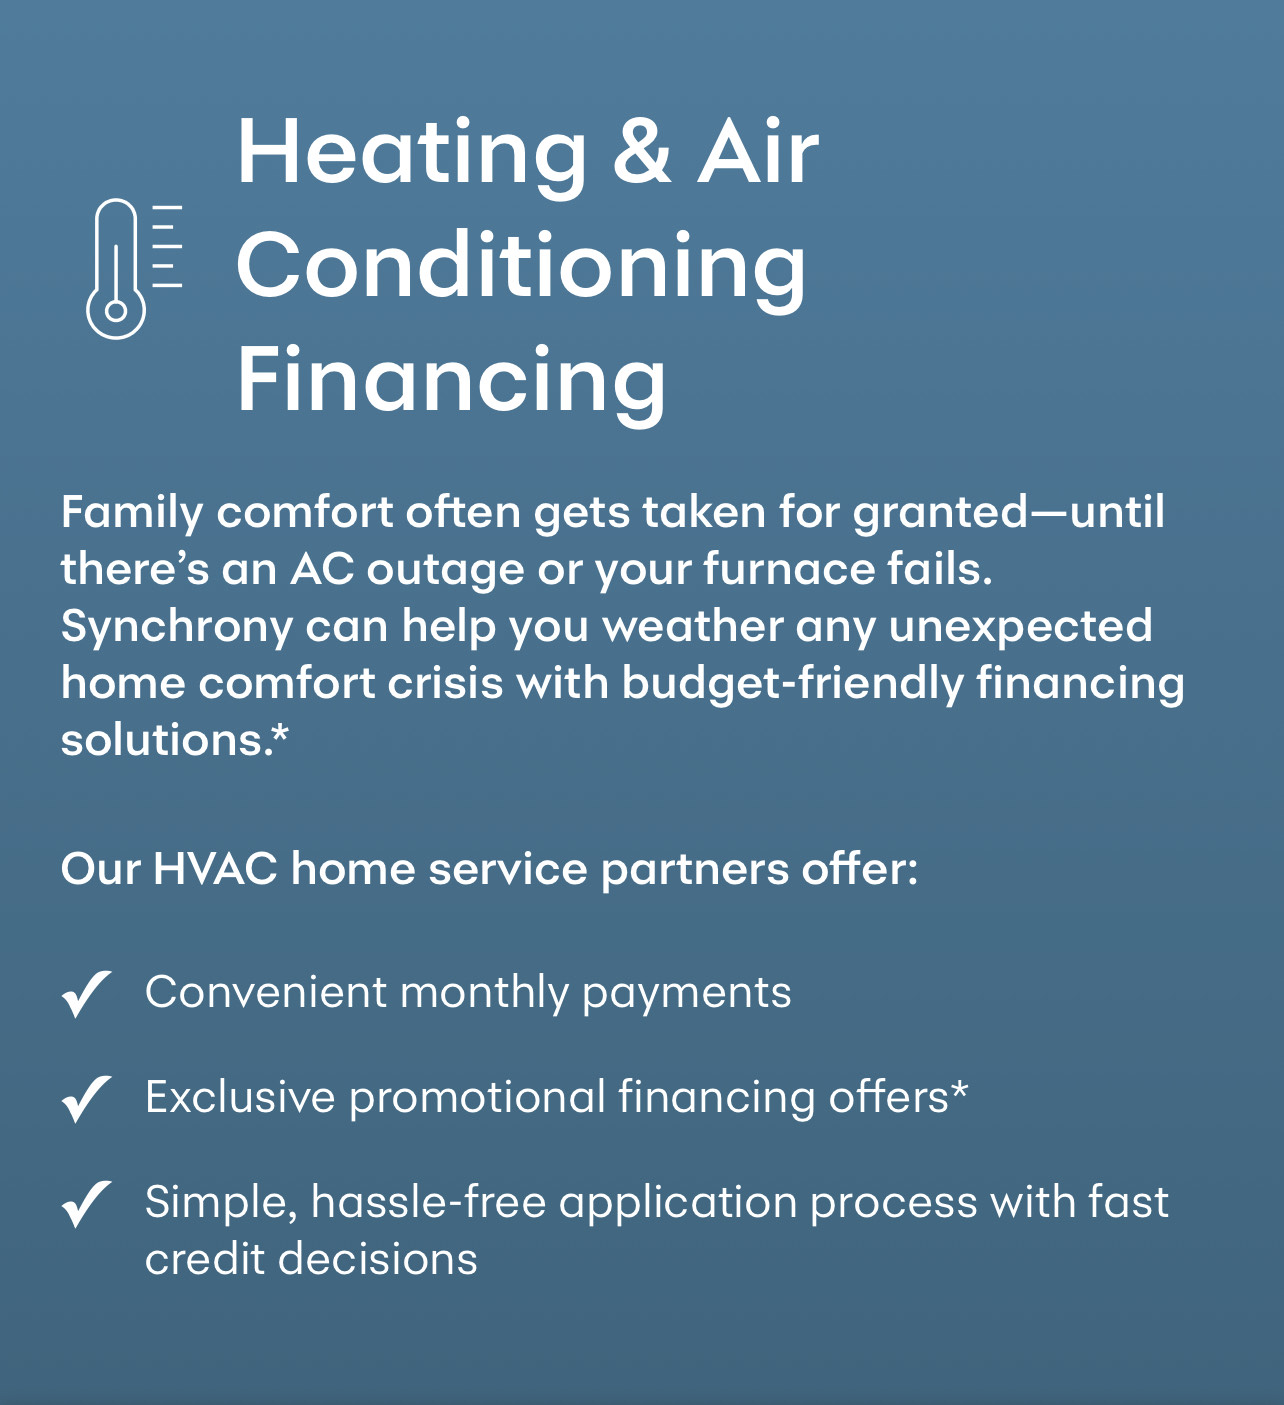 Heating and Cooling Financing Options - Air Maintenance HVAC